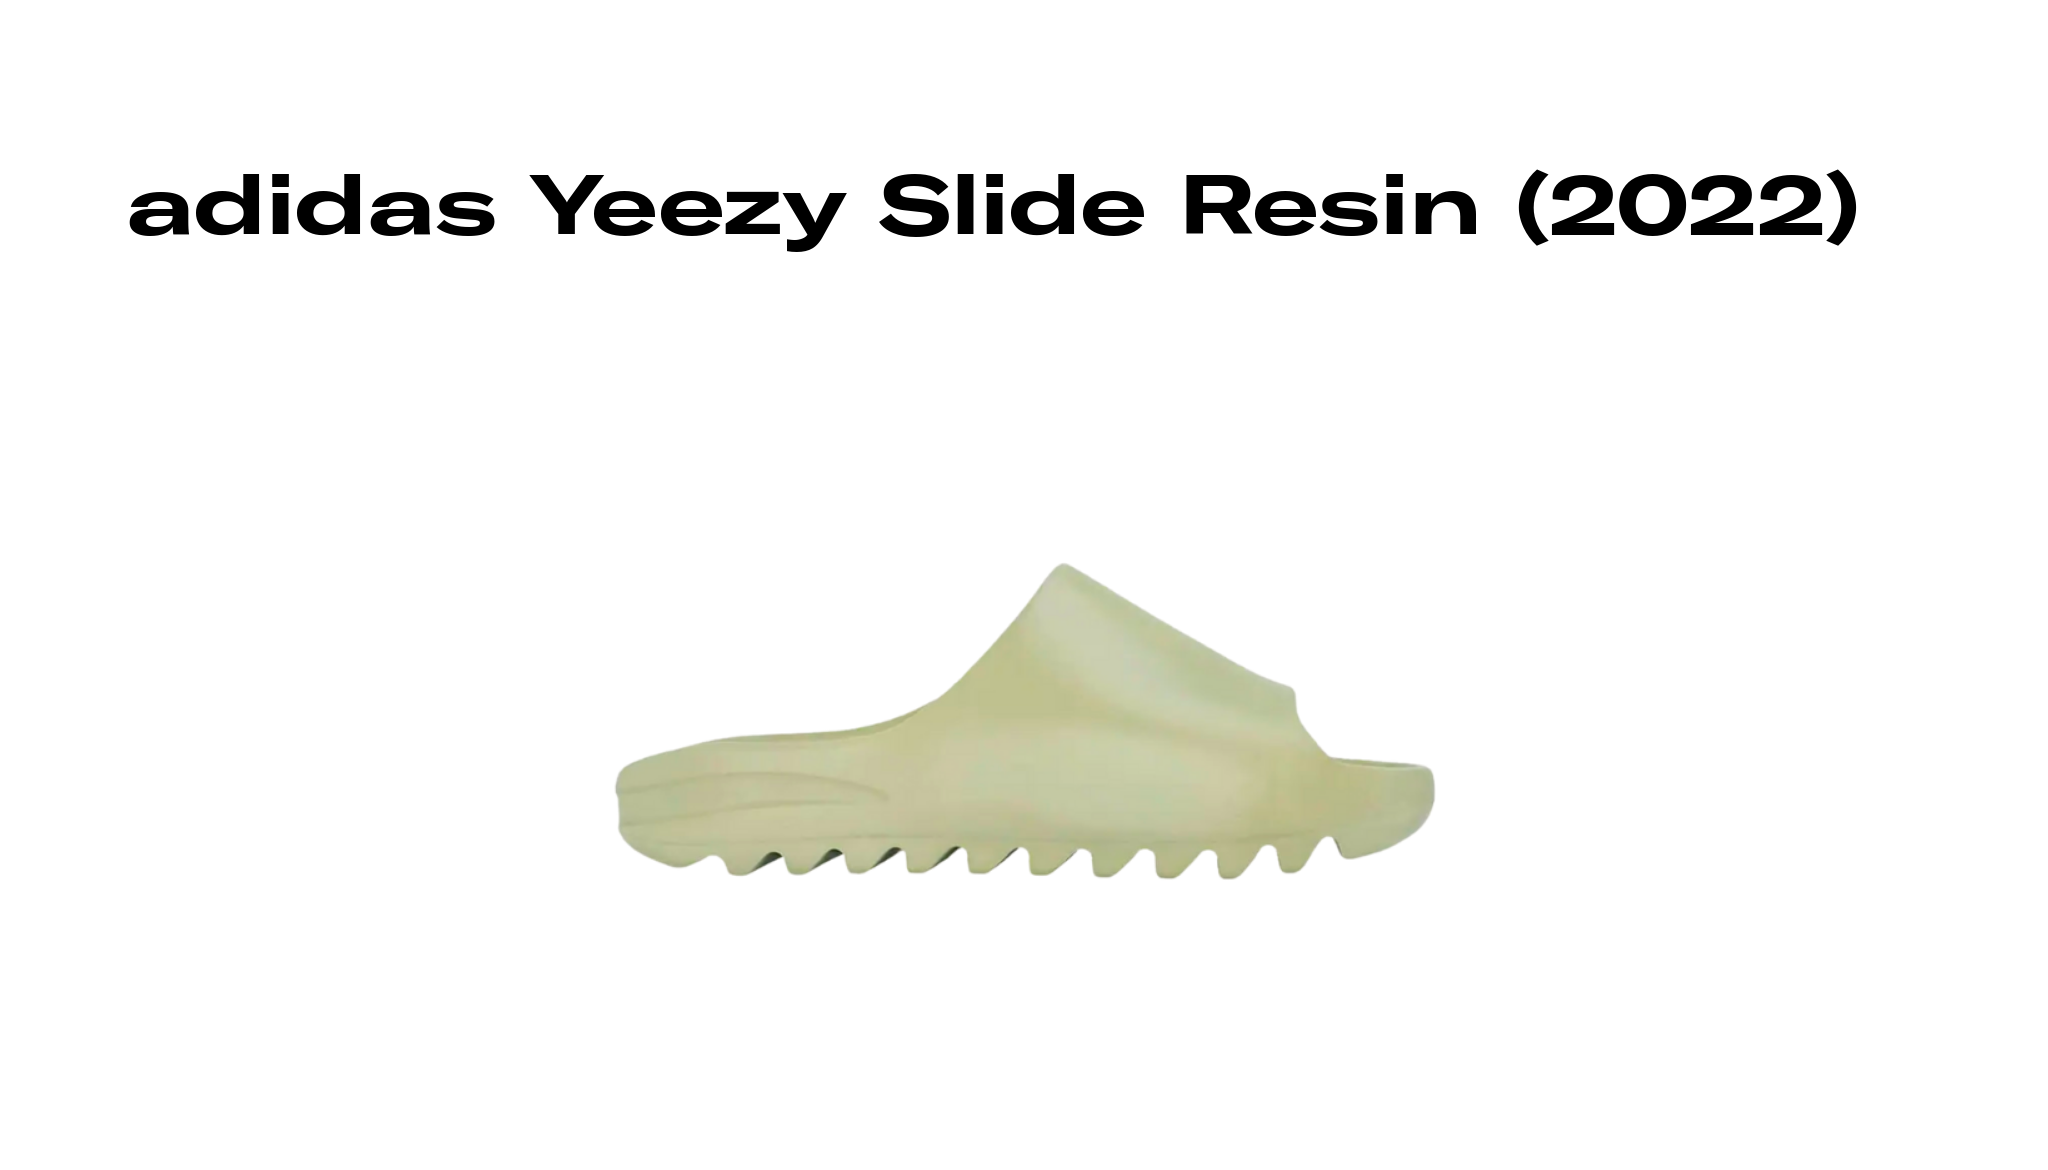 adidas Yeezy Slide Resin (2022) Raffles and Release Date | Sole 